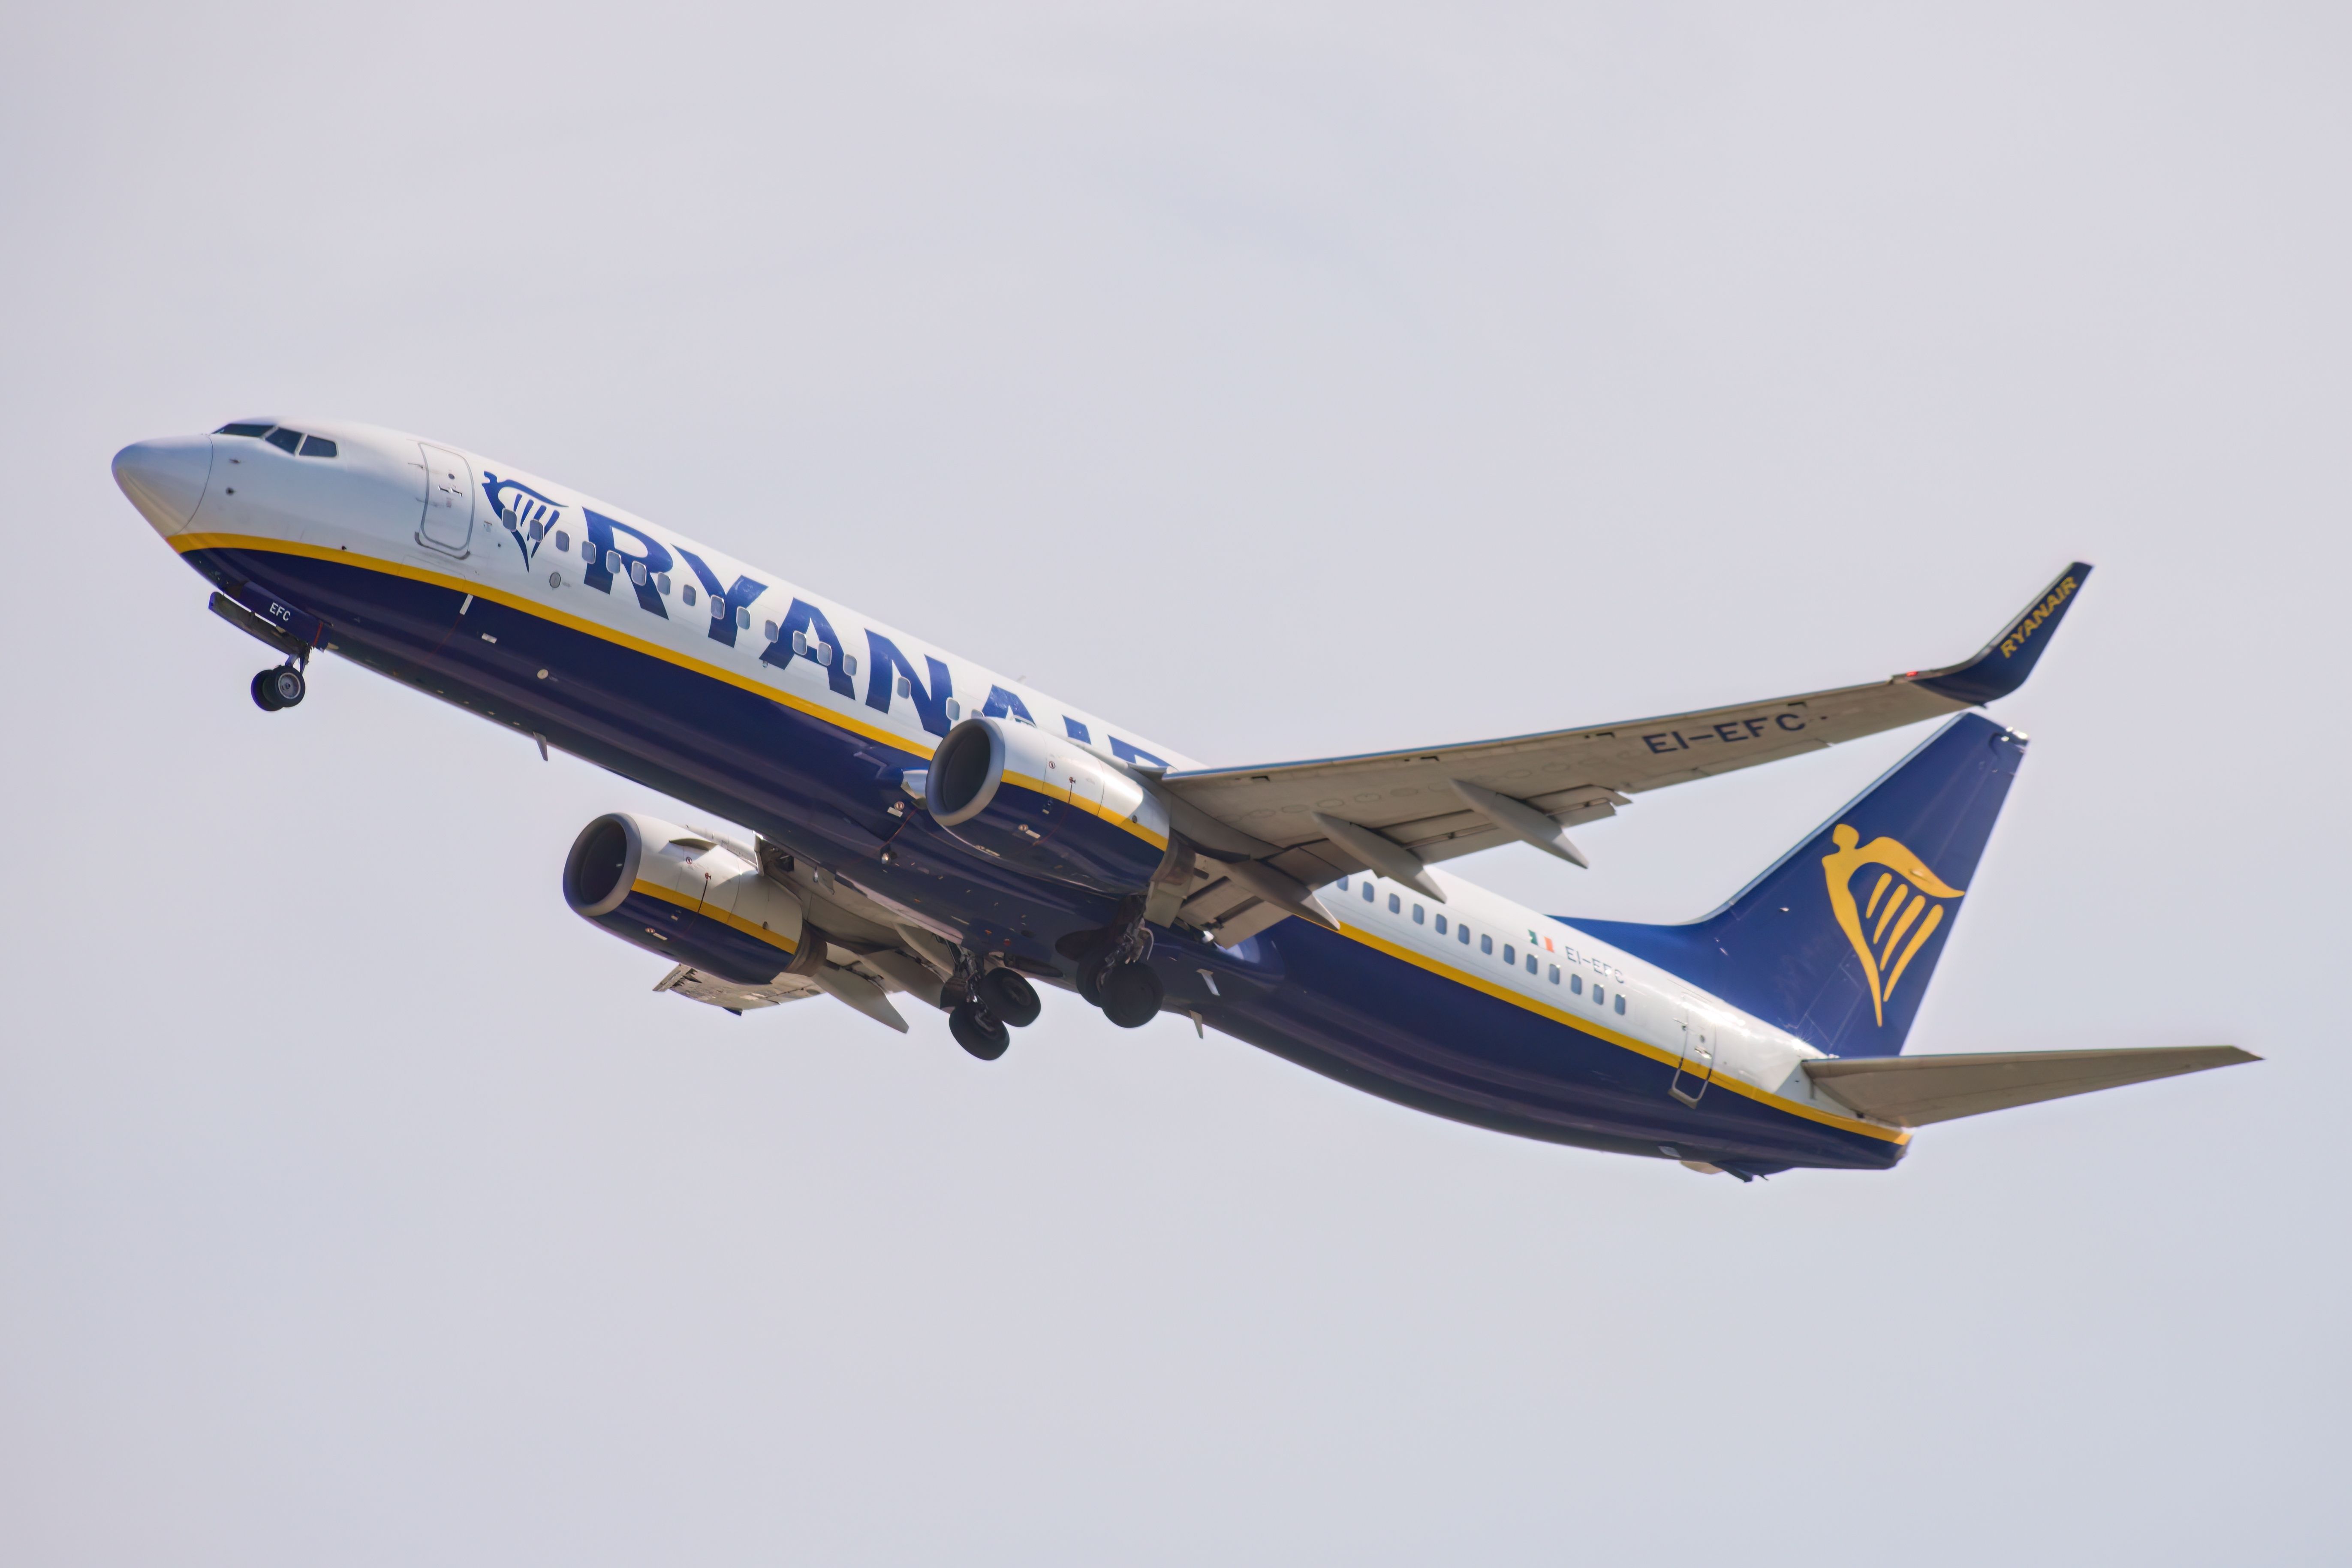 A Ryanair Boeing 737-800 just after takeoff.